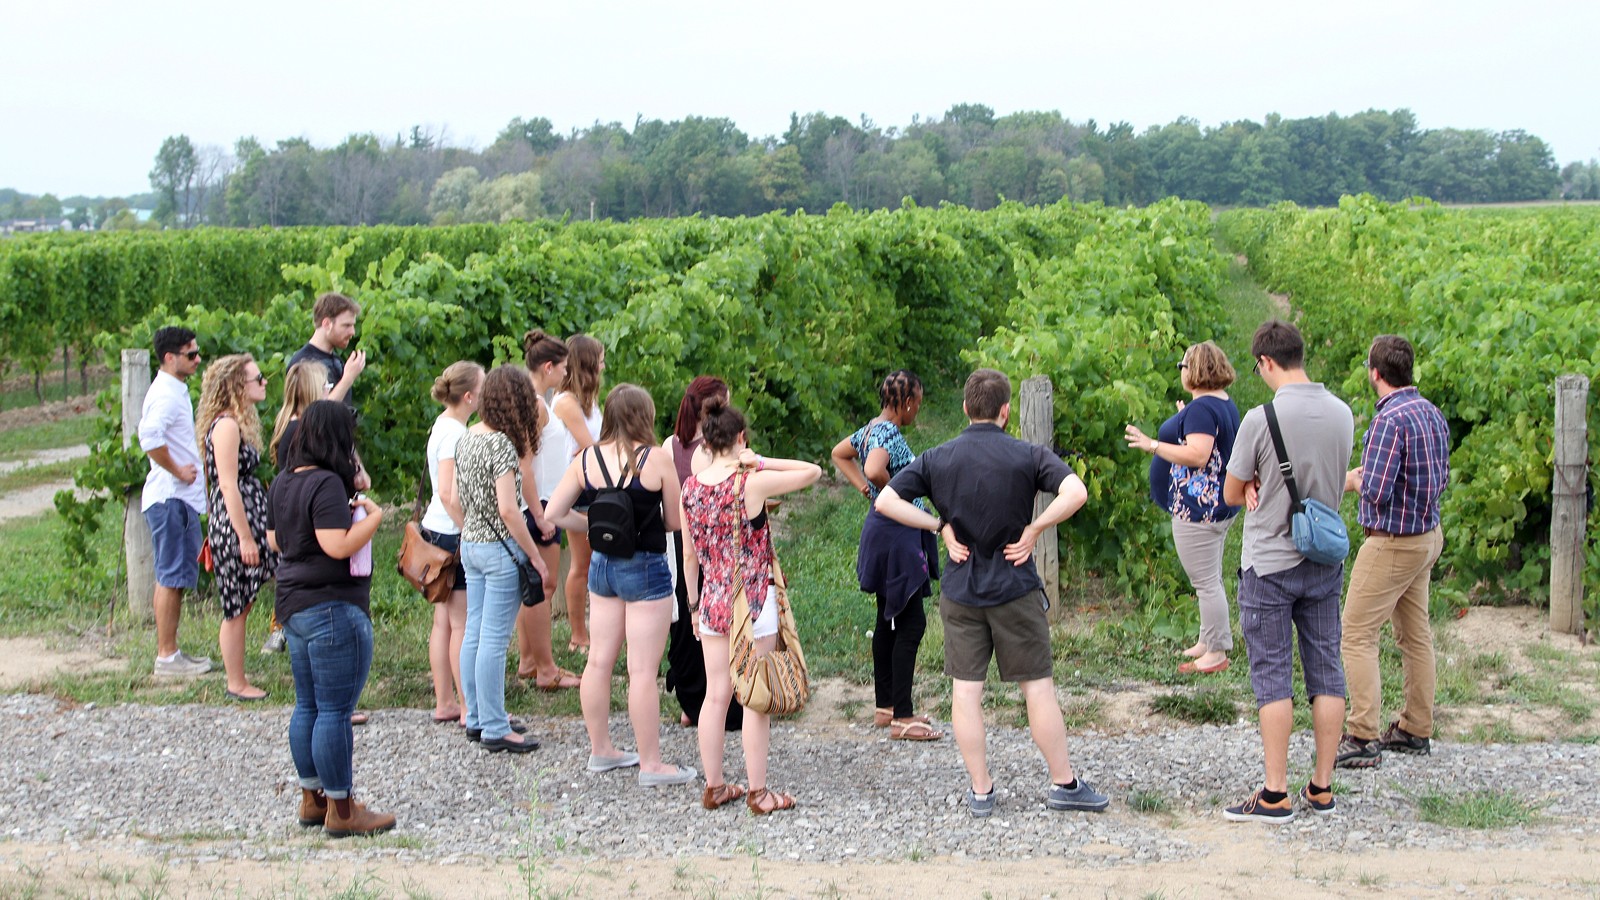 Students in the Oenology and Viticulture (OEVI) degree program and Grape and Wine Technology certificate program (OEVC) headed out to the field for vineyard and winery tours with two of the program’s local alumni.